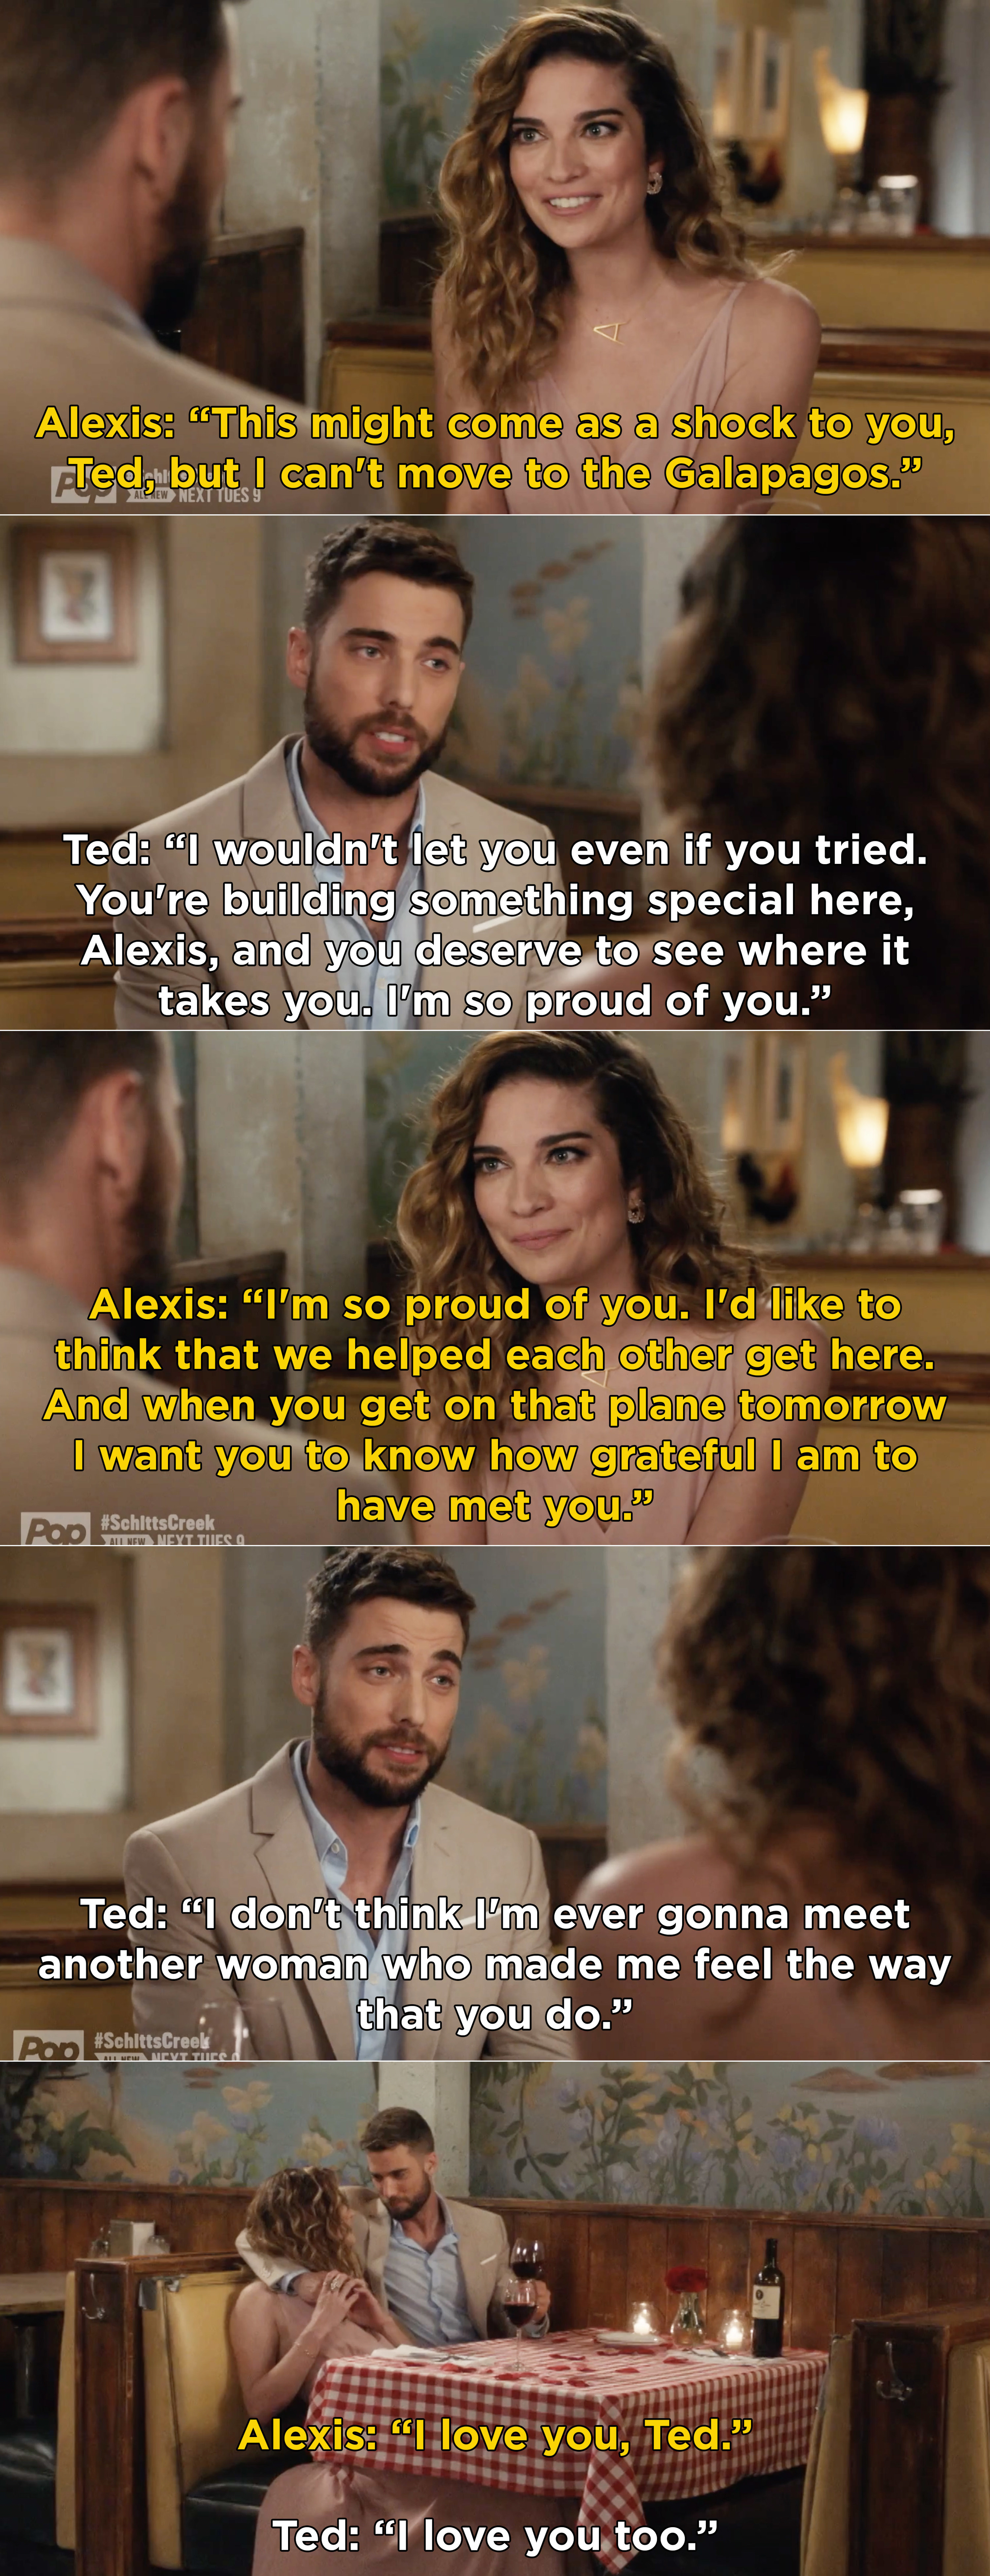 Alexis and Ted saying I love you and saying that they are proud of each other